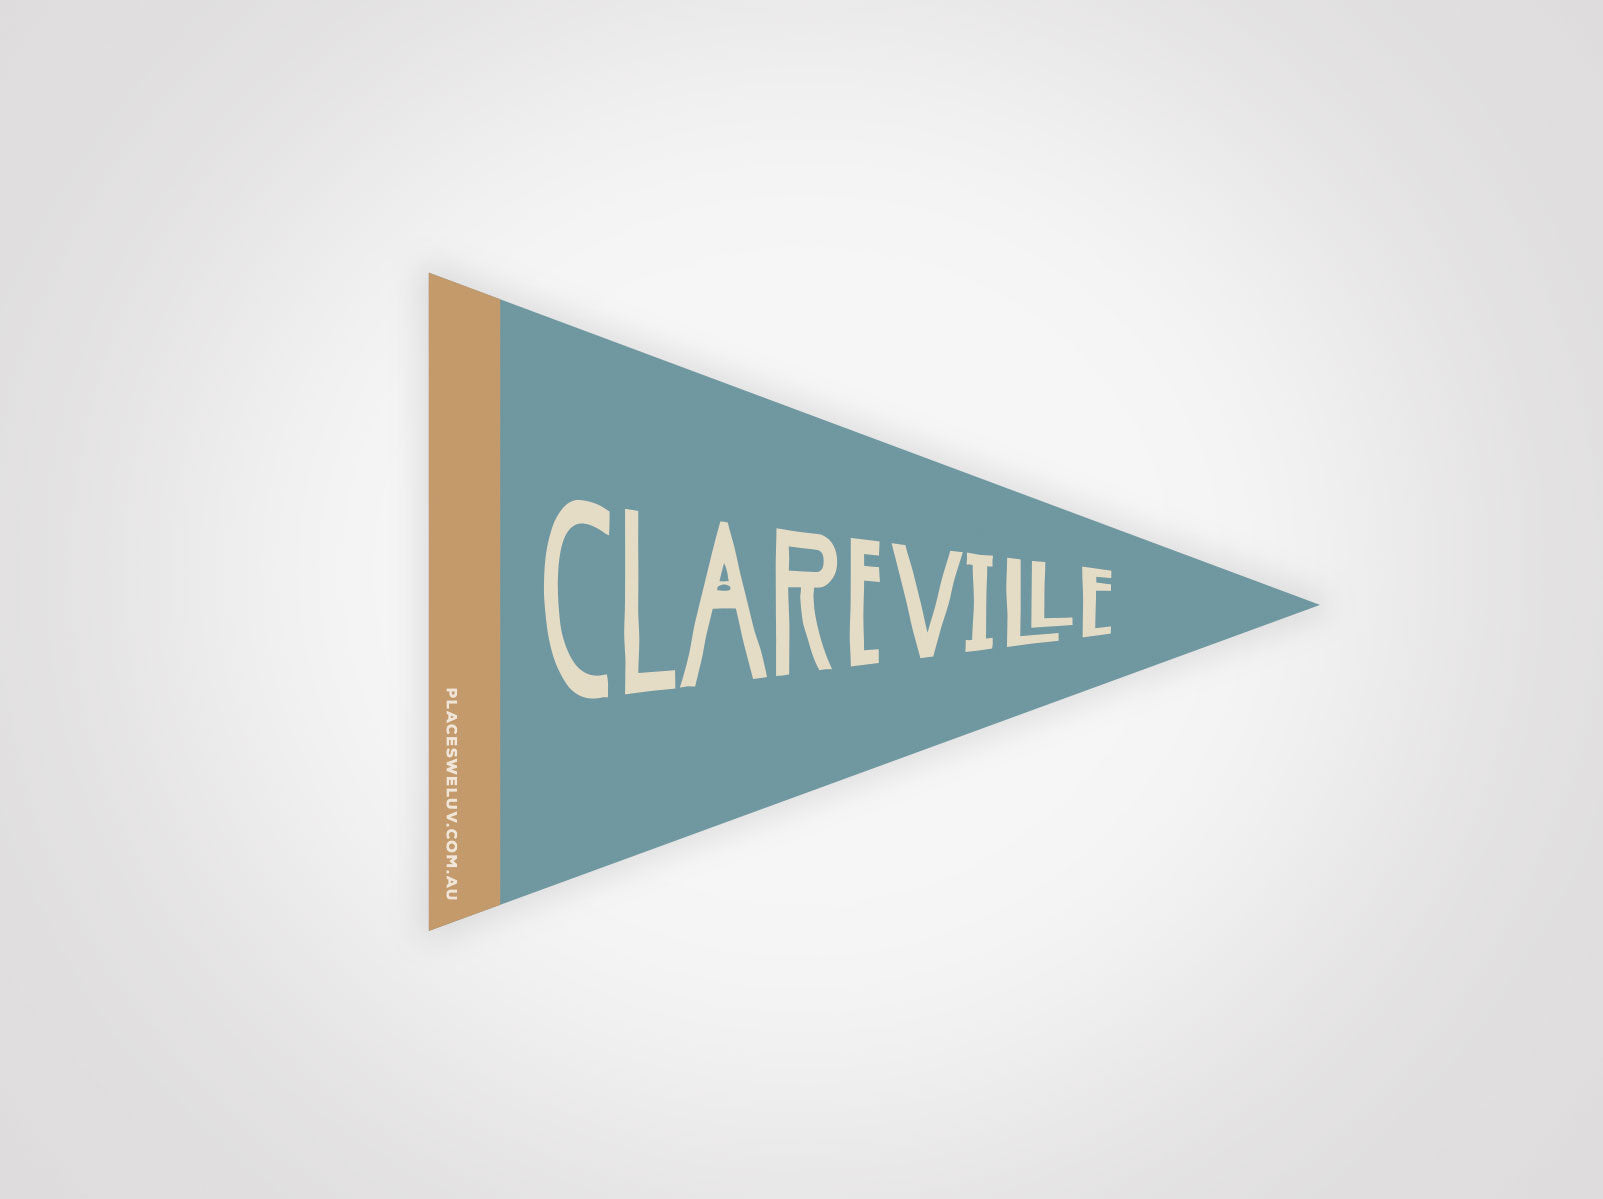 Clareville vintage travel style flag decals by Places we luv